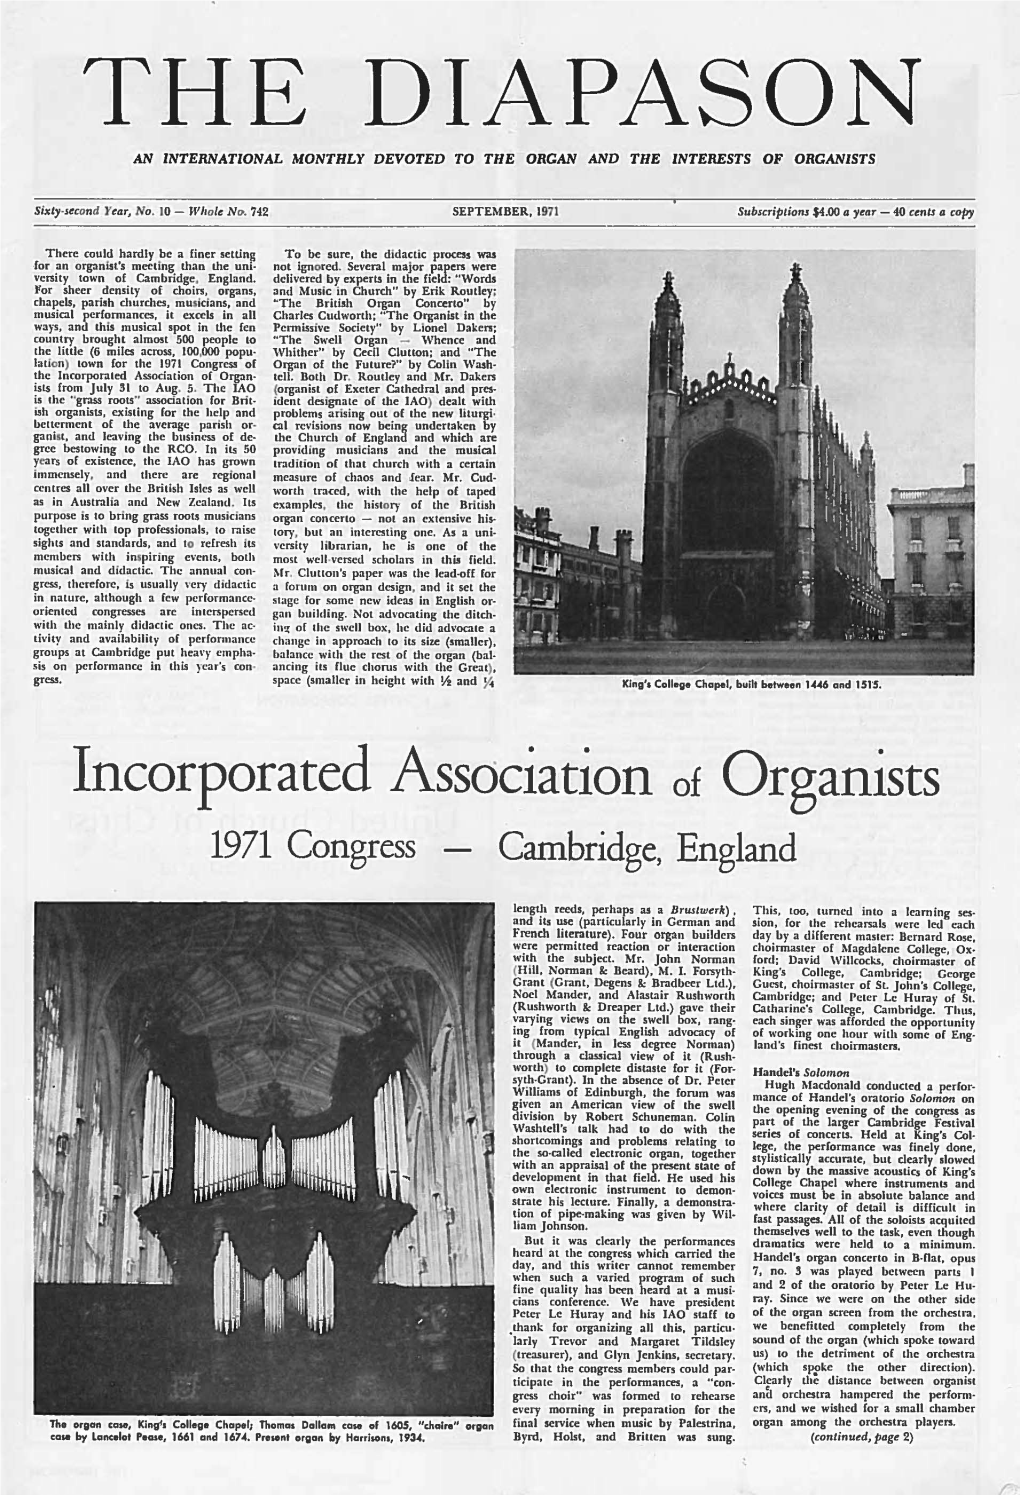 The Diapason an International Monthly Devoted to the Organ and the Interests of Organists